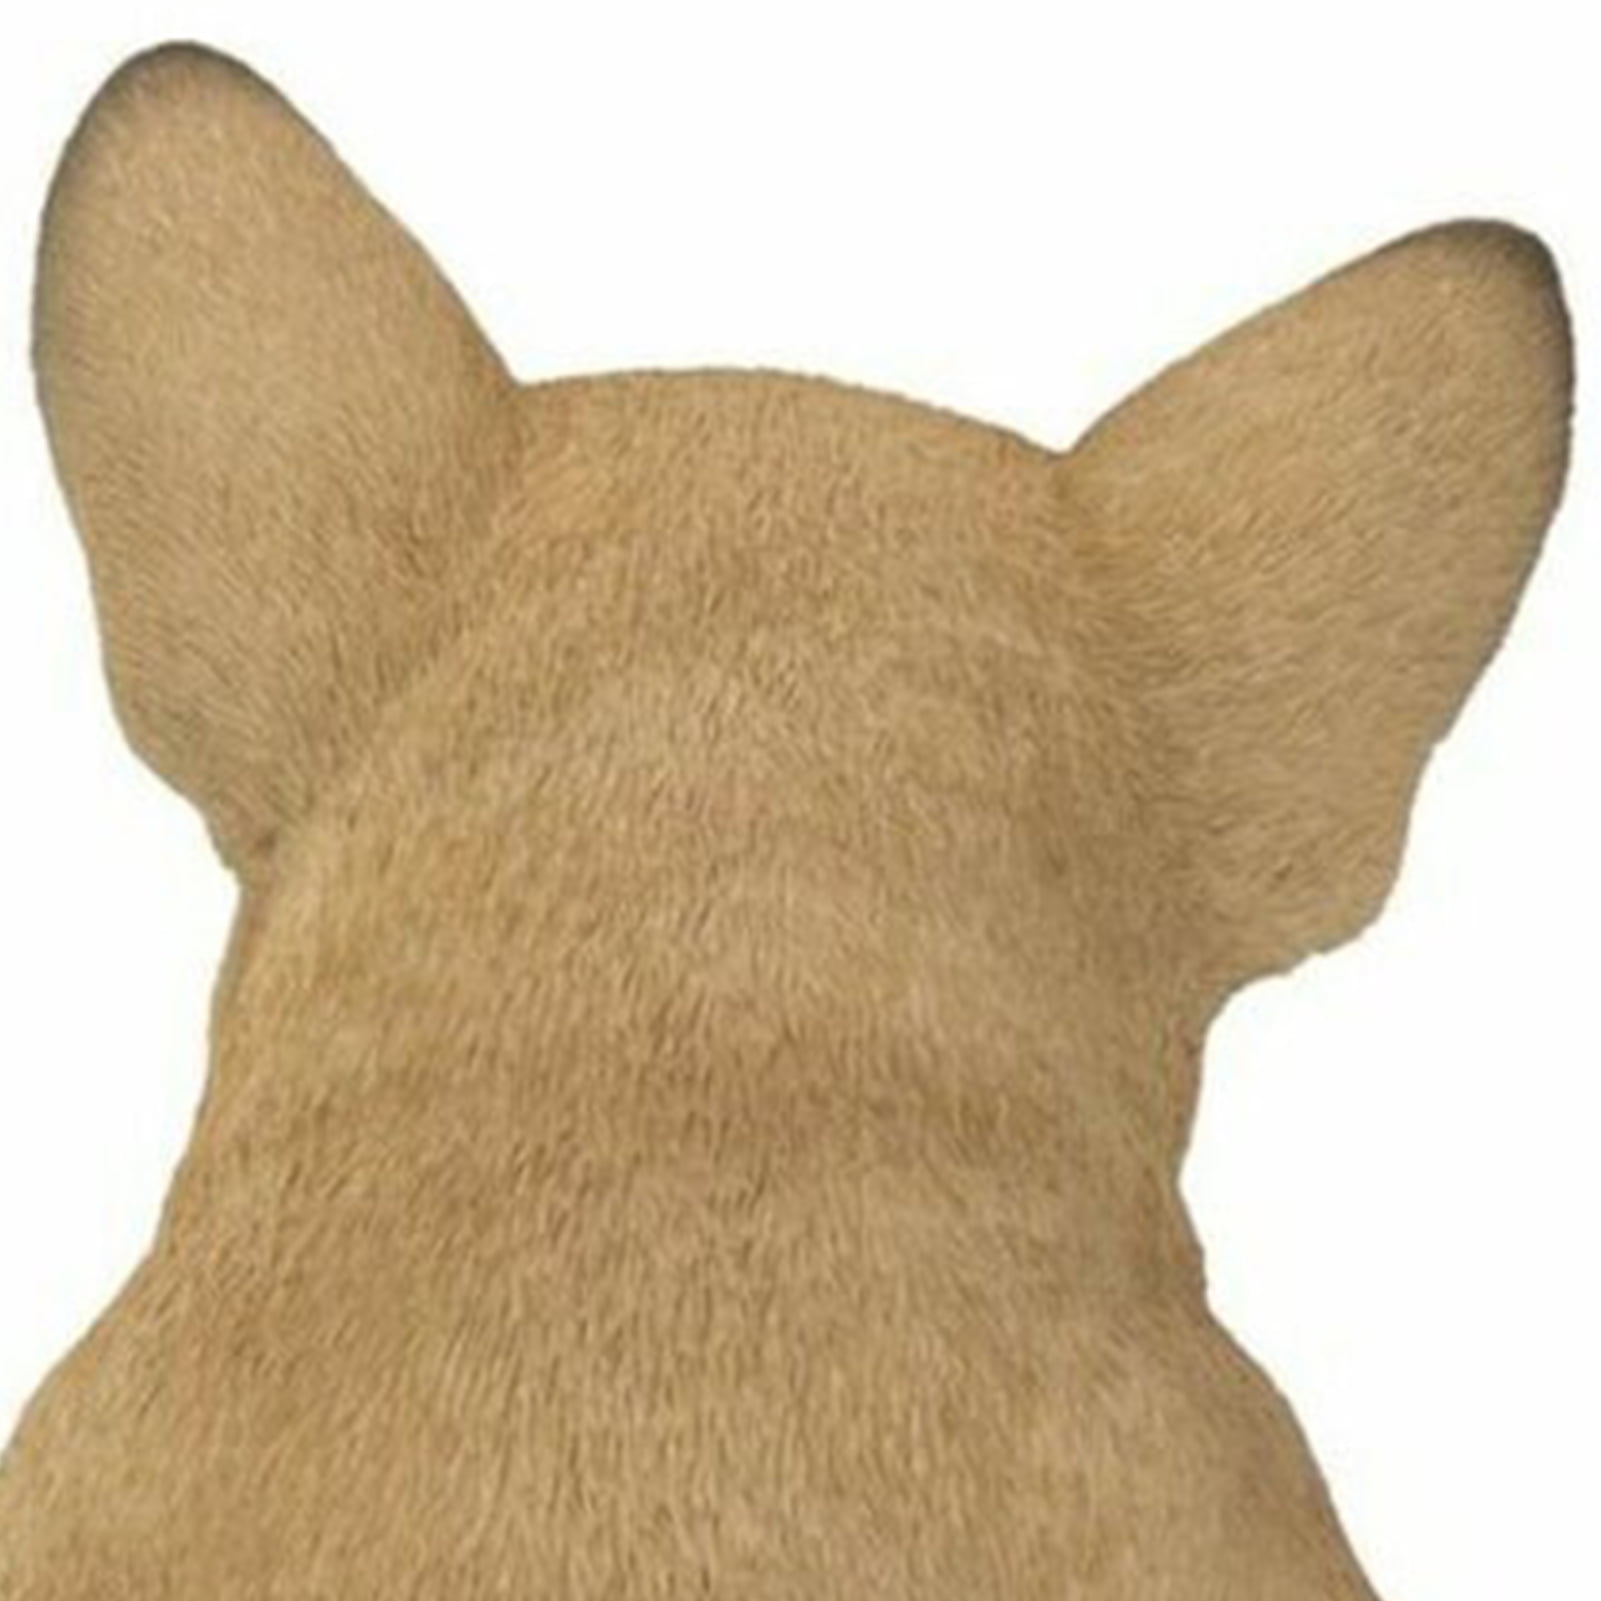 Realistic Lifelike French Bulldog Puppy Statue 2.95 Tall Frenchie Figurine Dog Animal Collectible, Yellow